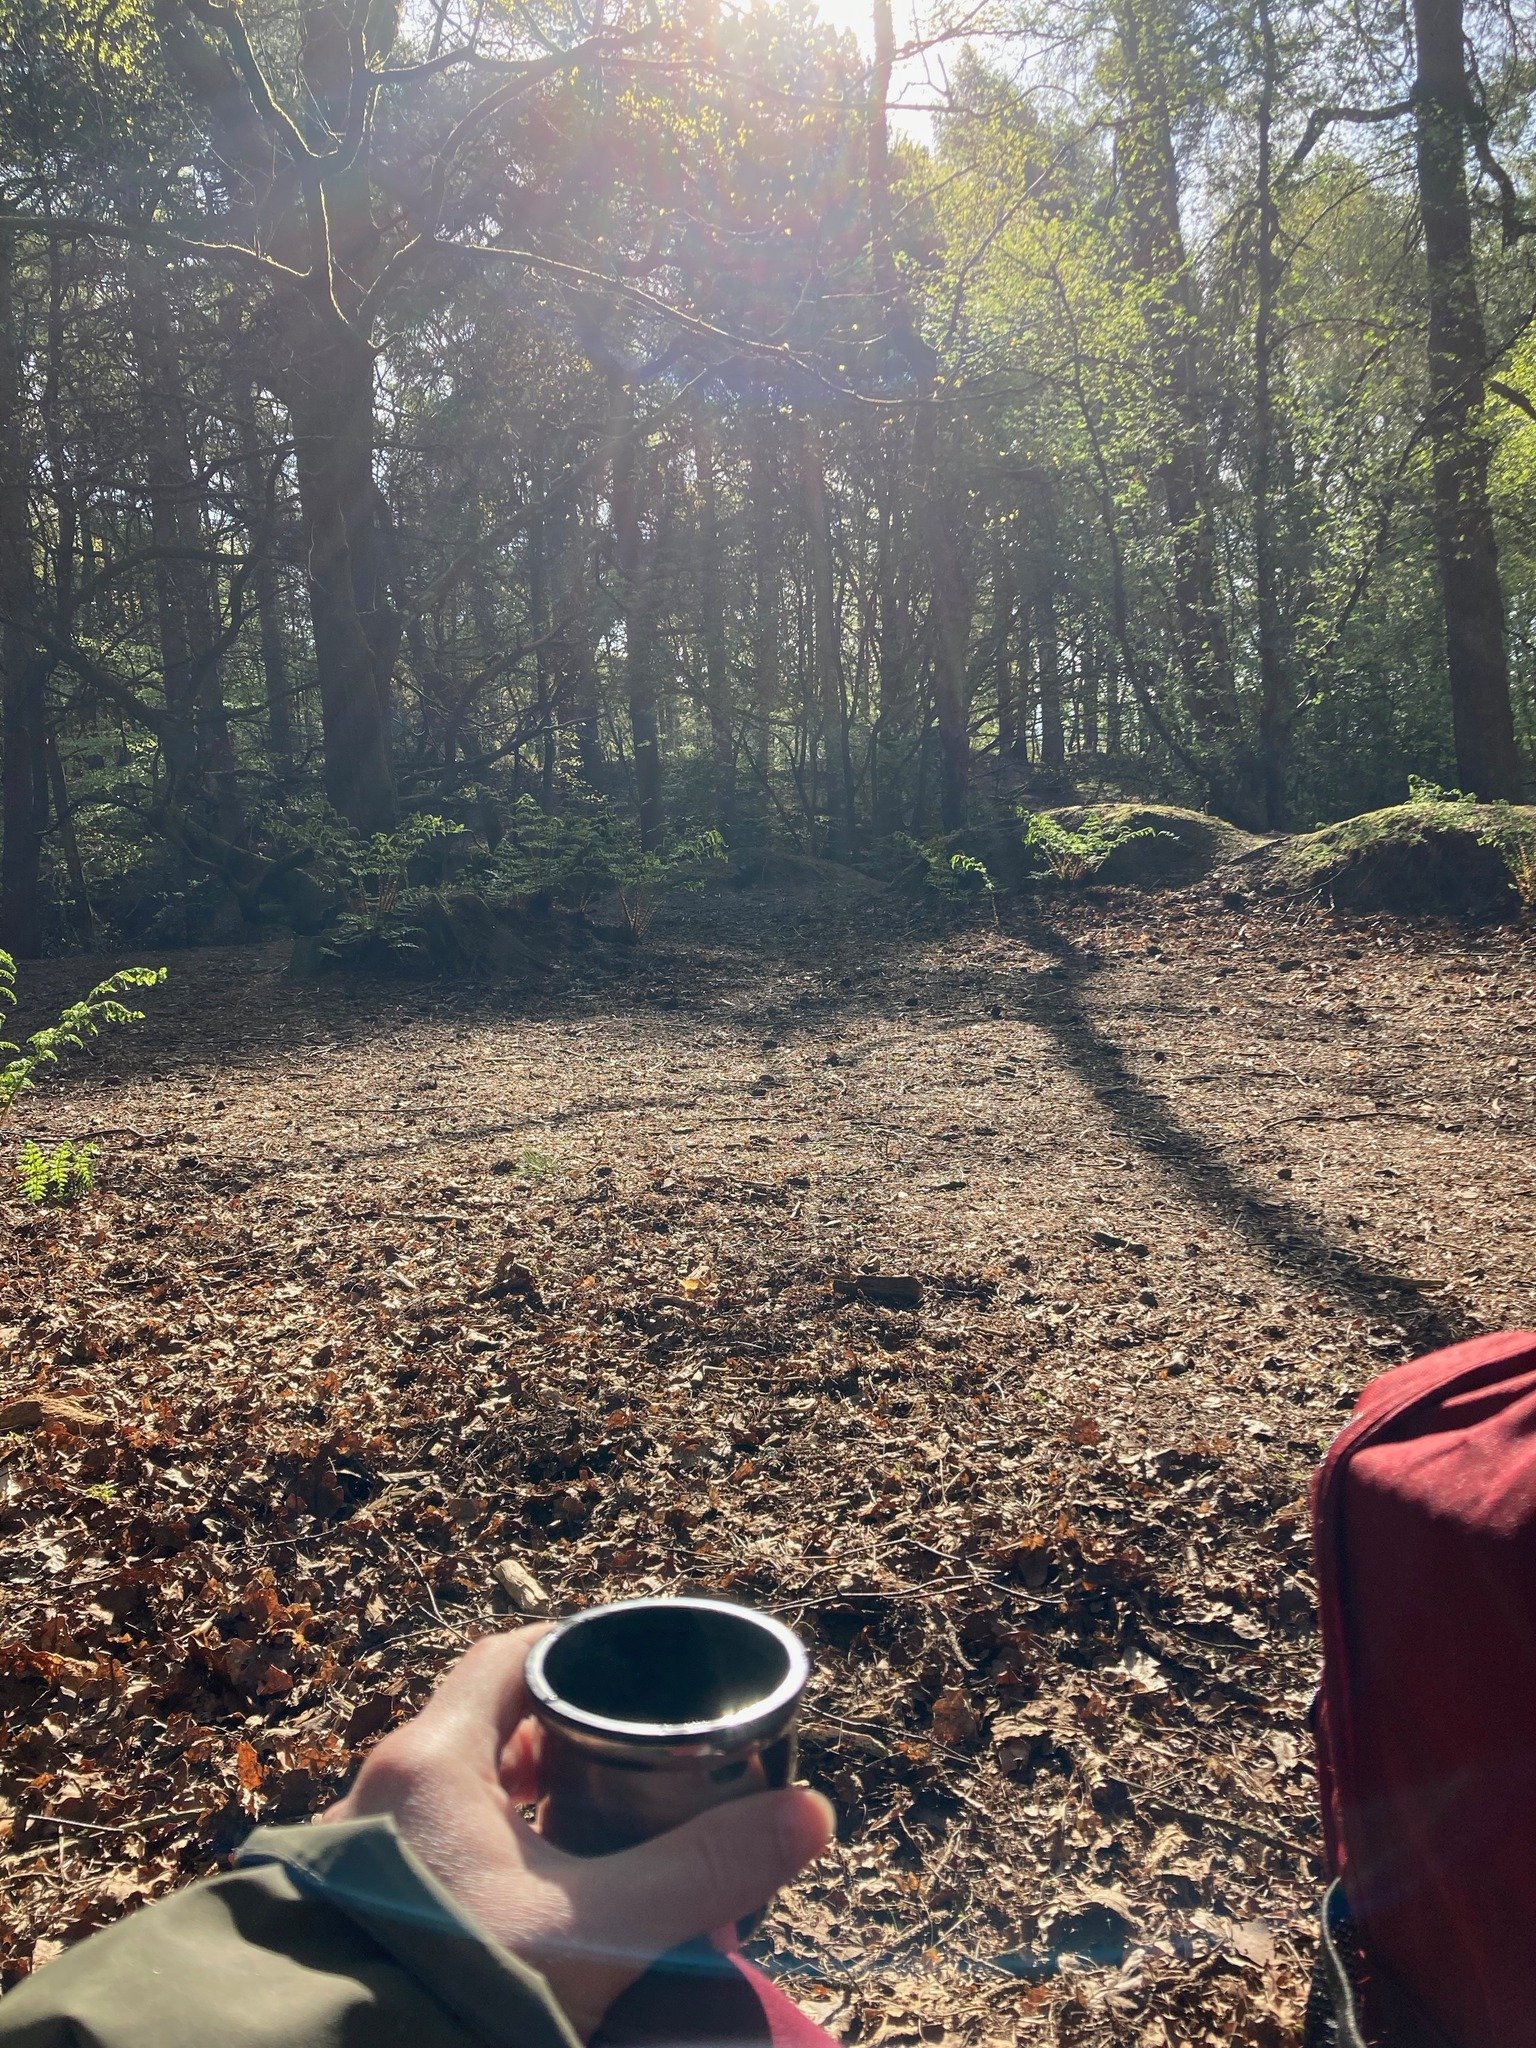 🌳Join me in the woods this month...

For forest bathing, cacao, journaling, meditation &amp; so much more!

The earth is warming, the sun is shining, the birds are singing, life is blooming... 

Come &amp; hang out in nature to nourish your mind, bo